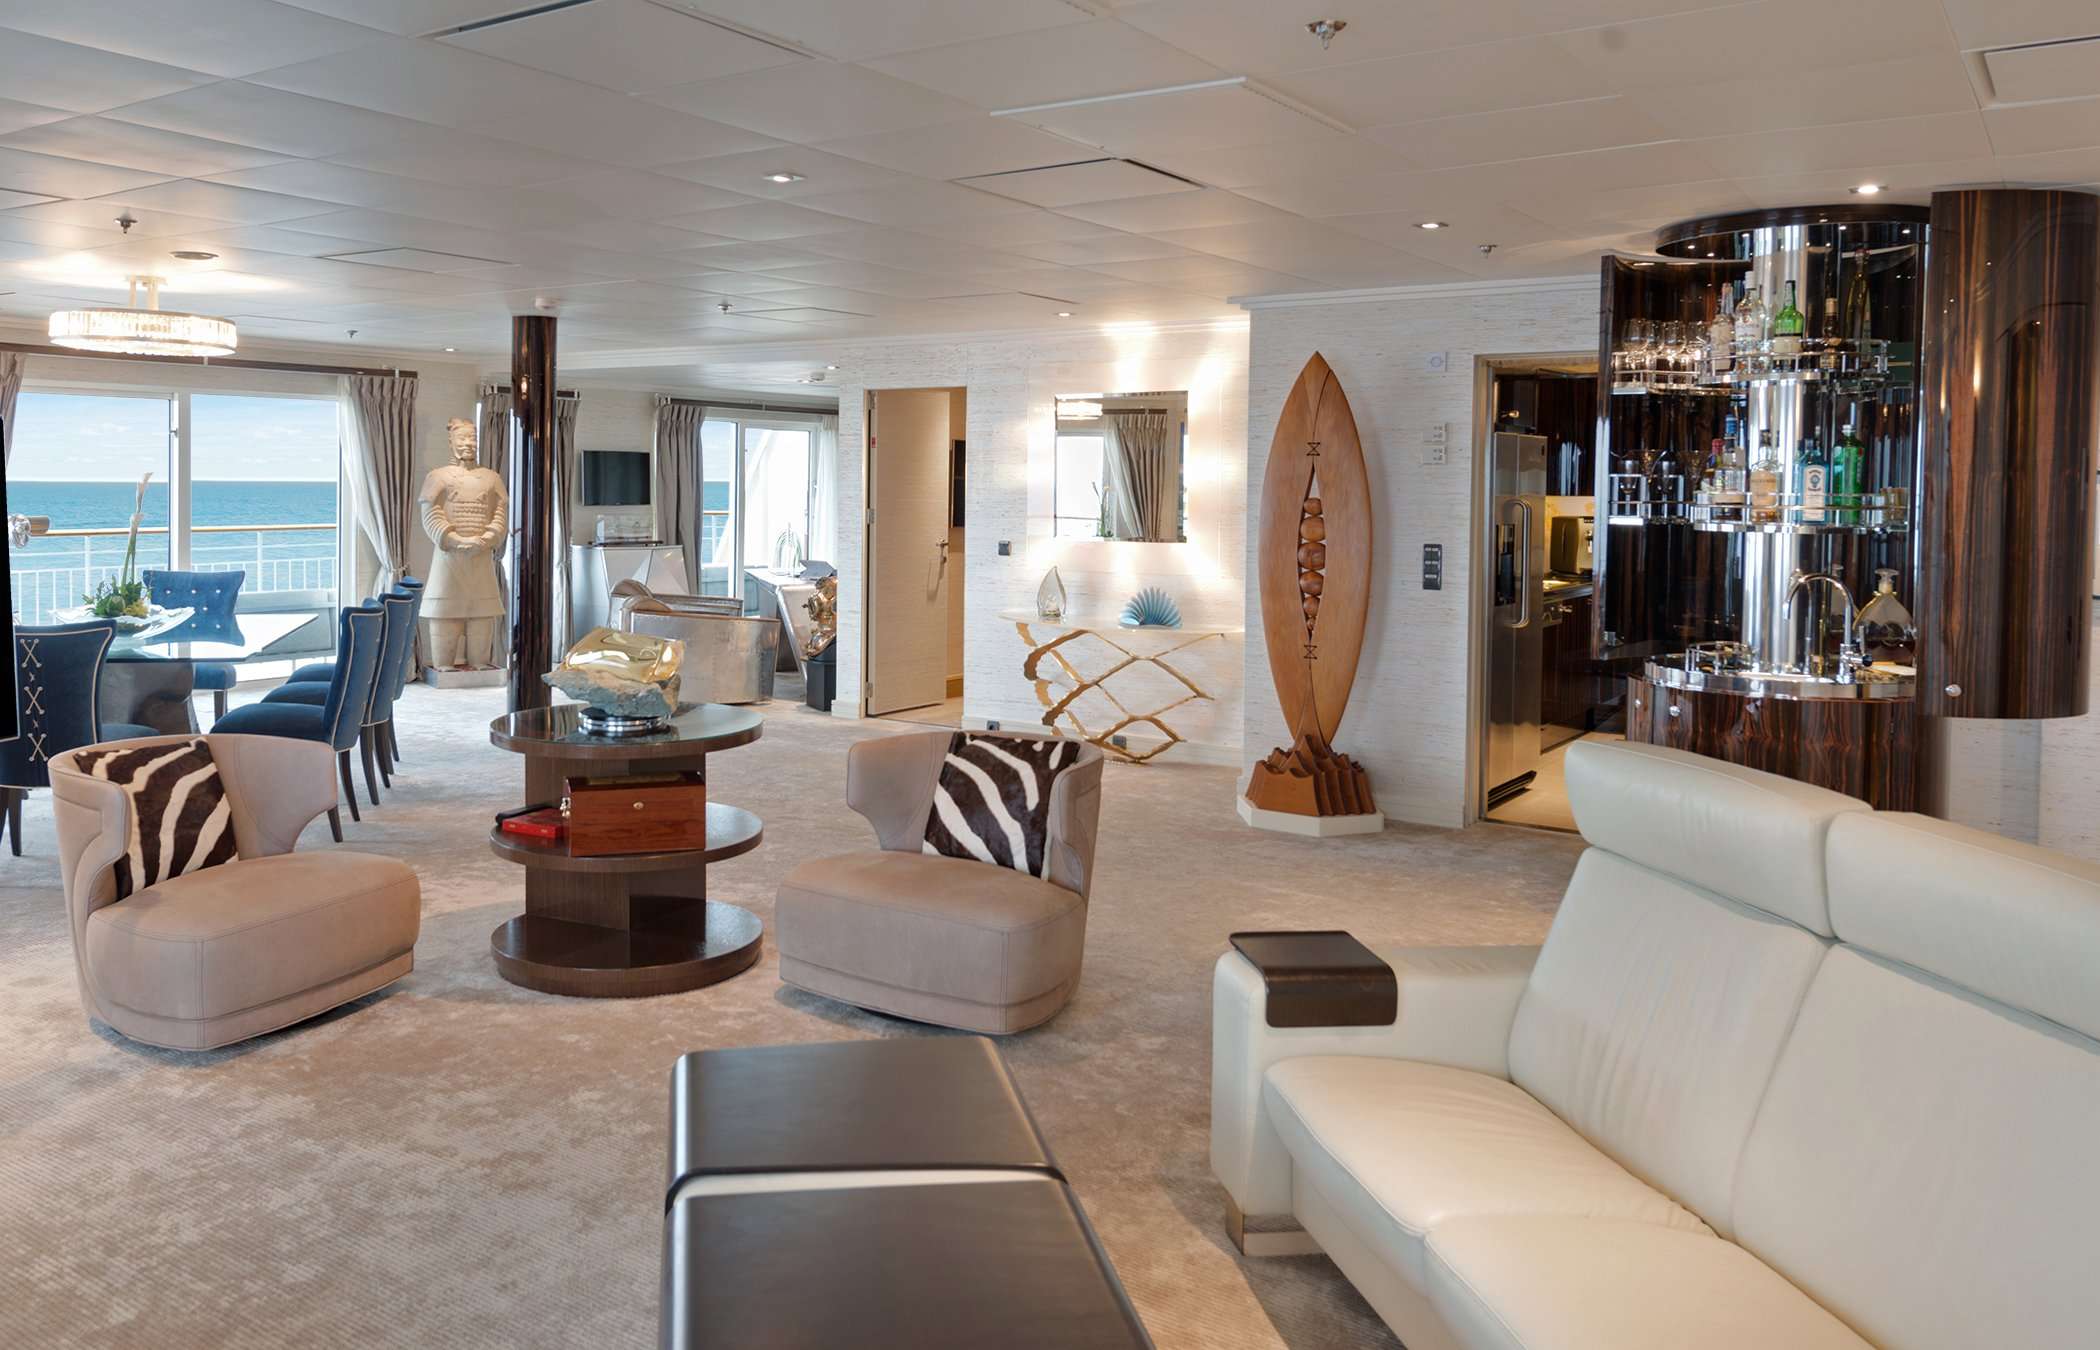 The World Cruise Ship Apartments For